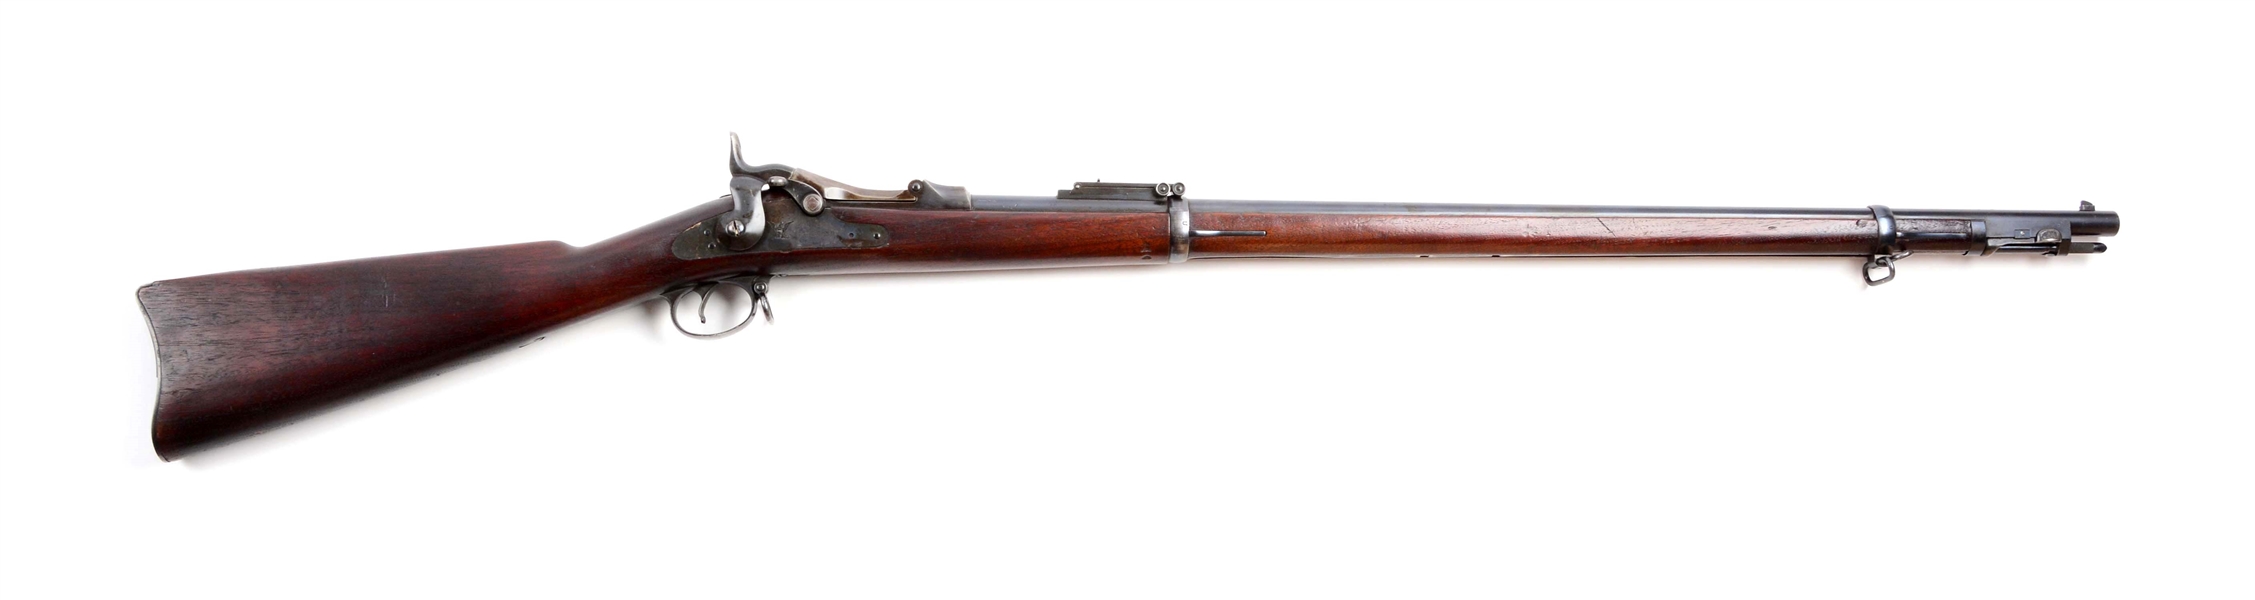 (A) HIGH CONDITION US SPRINGFIELD TRAPDOOR BREECH-LOADING RIFLE.  